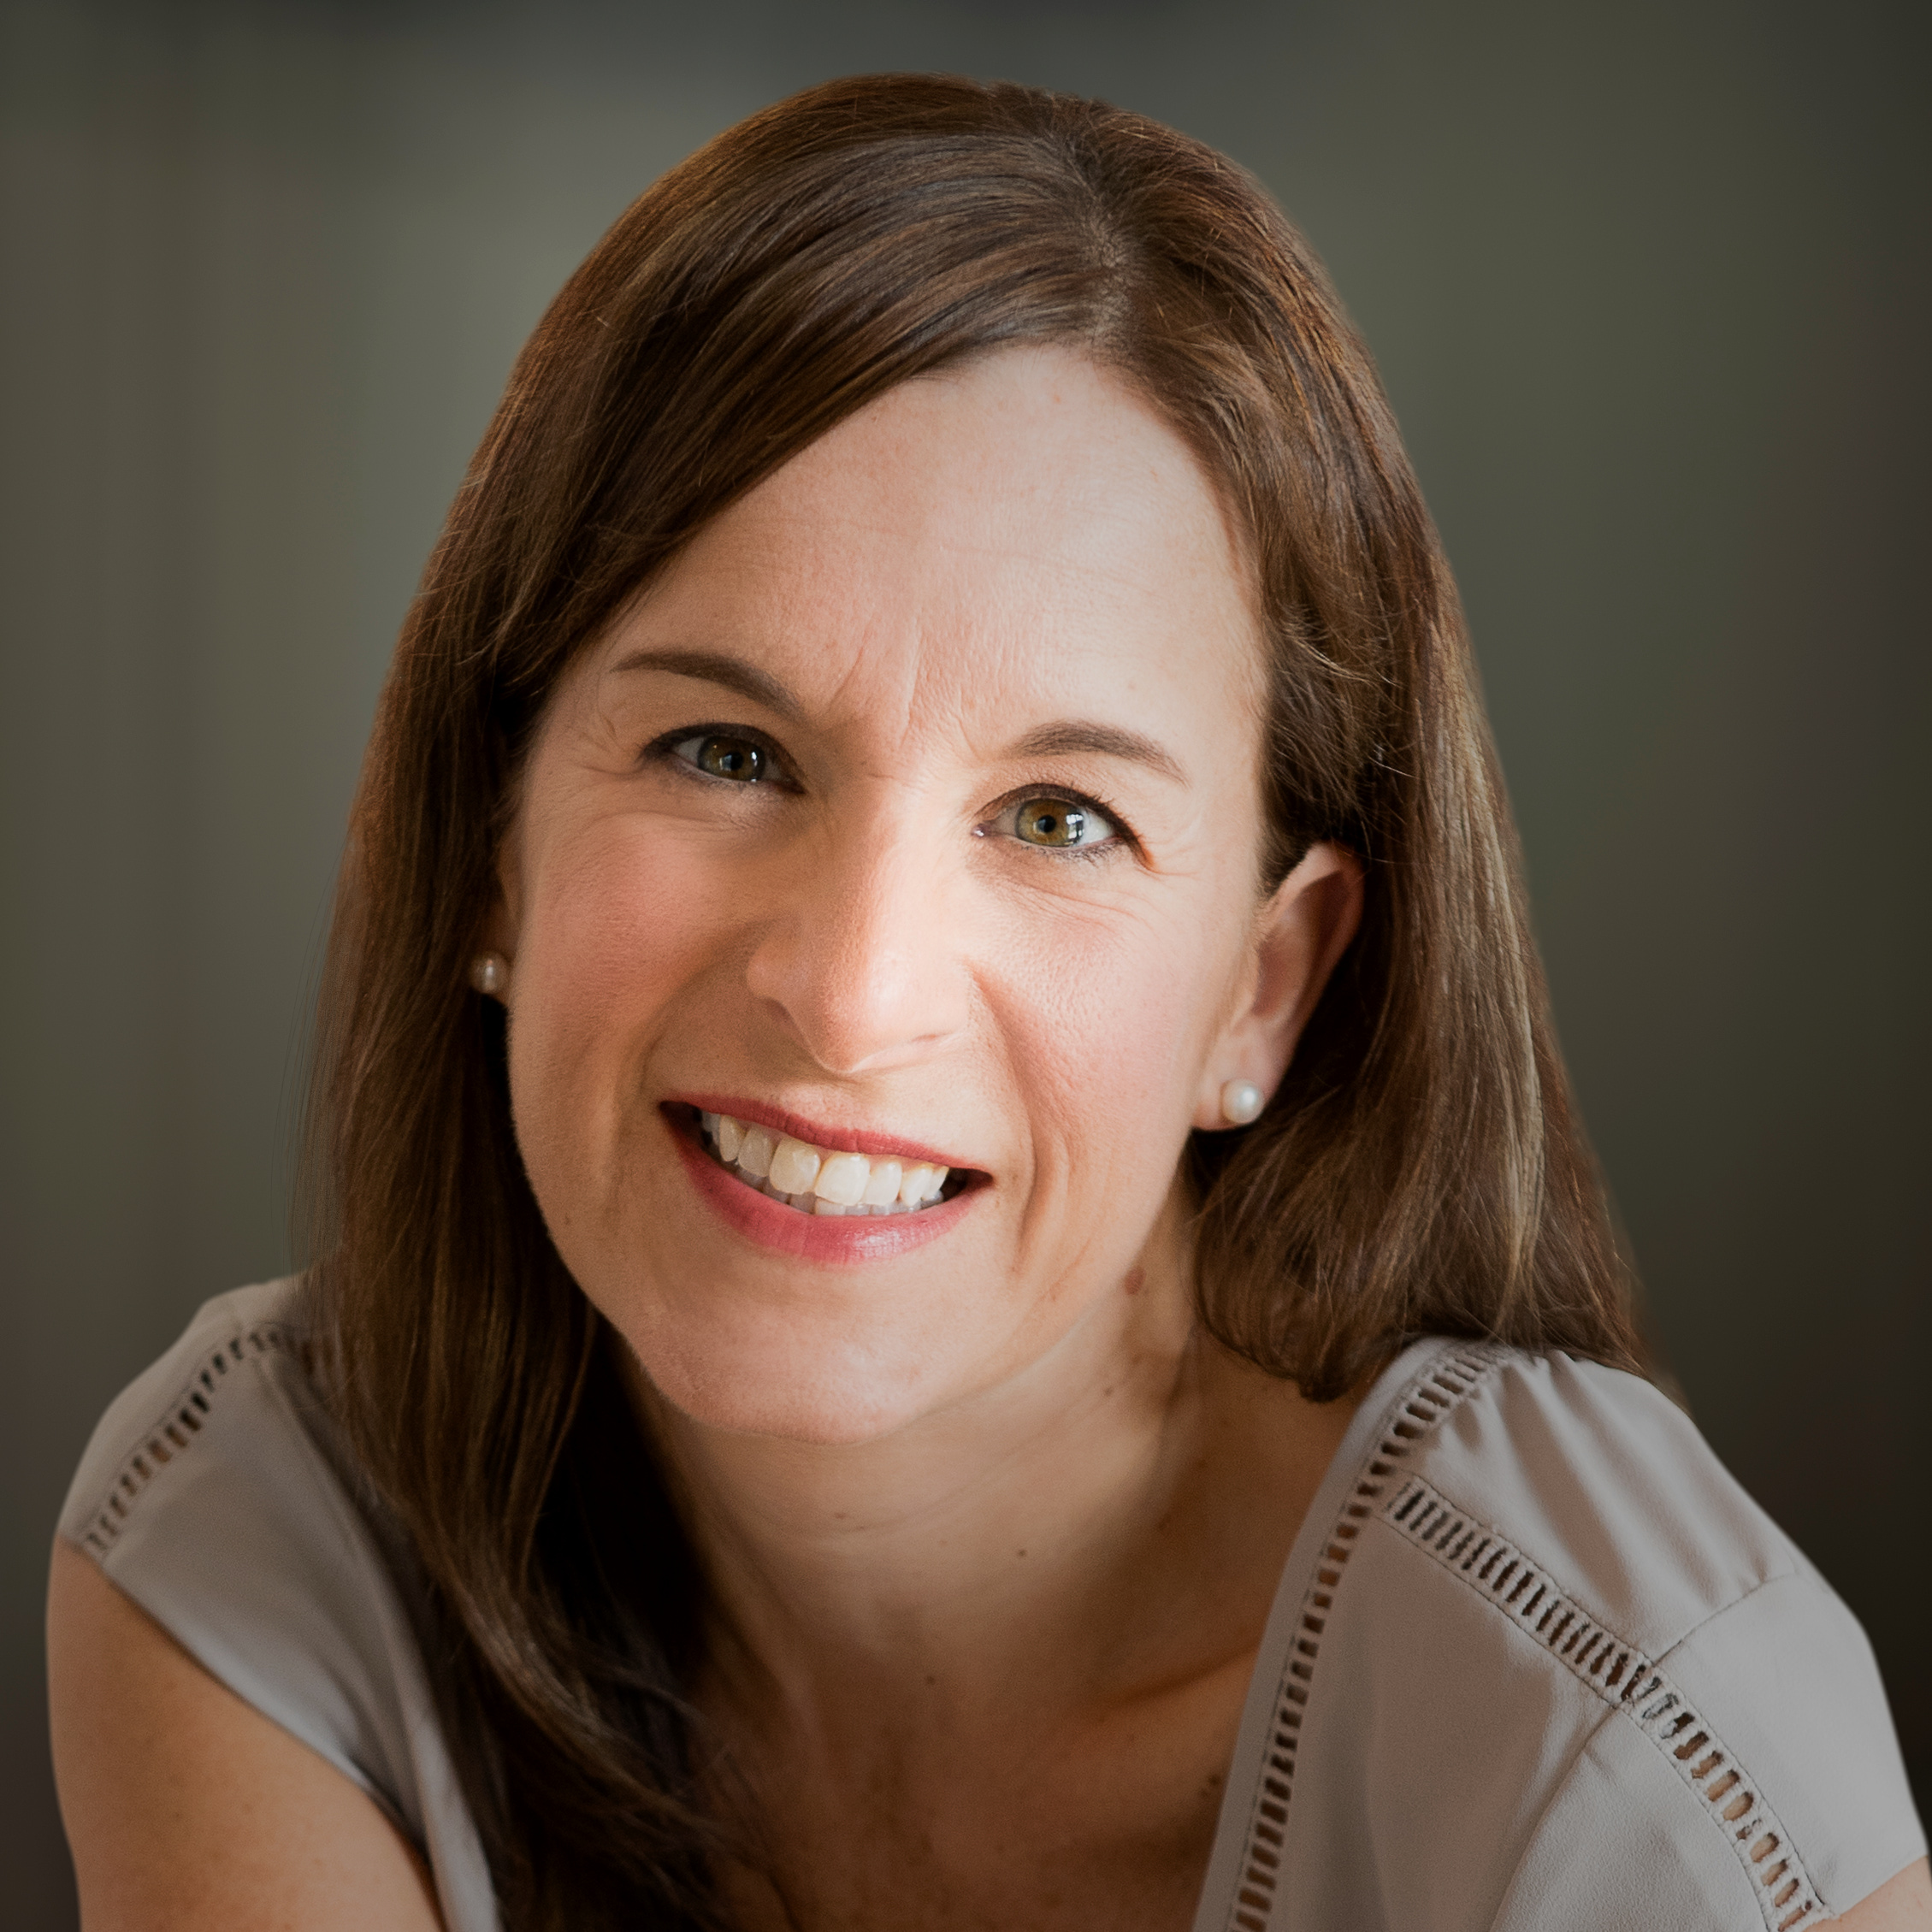 Susan LaMotte, Founder & CEO of exaqueo, an employer-brand consulting firm